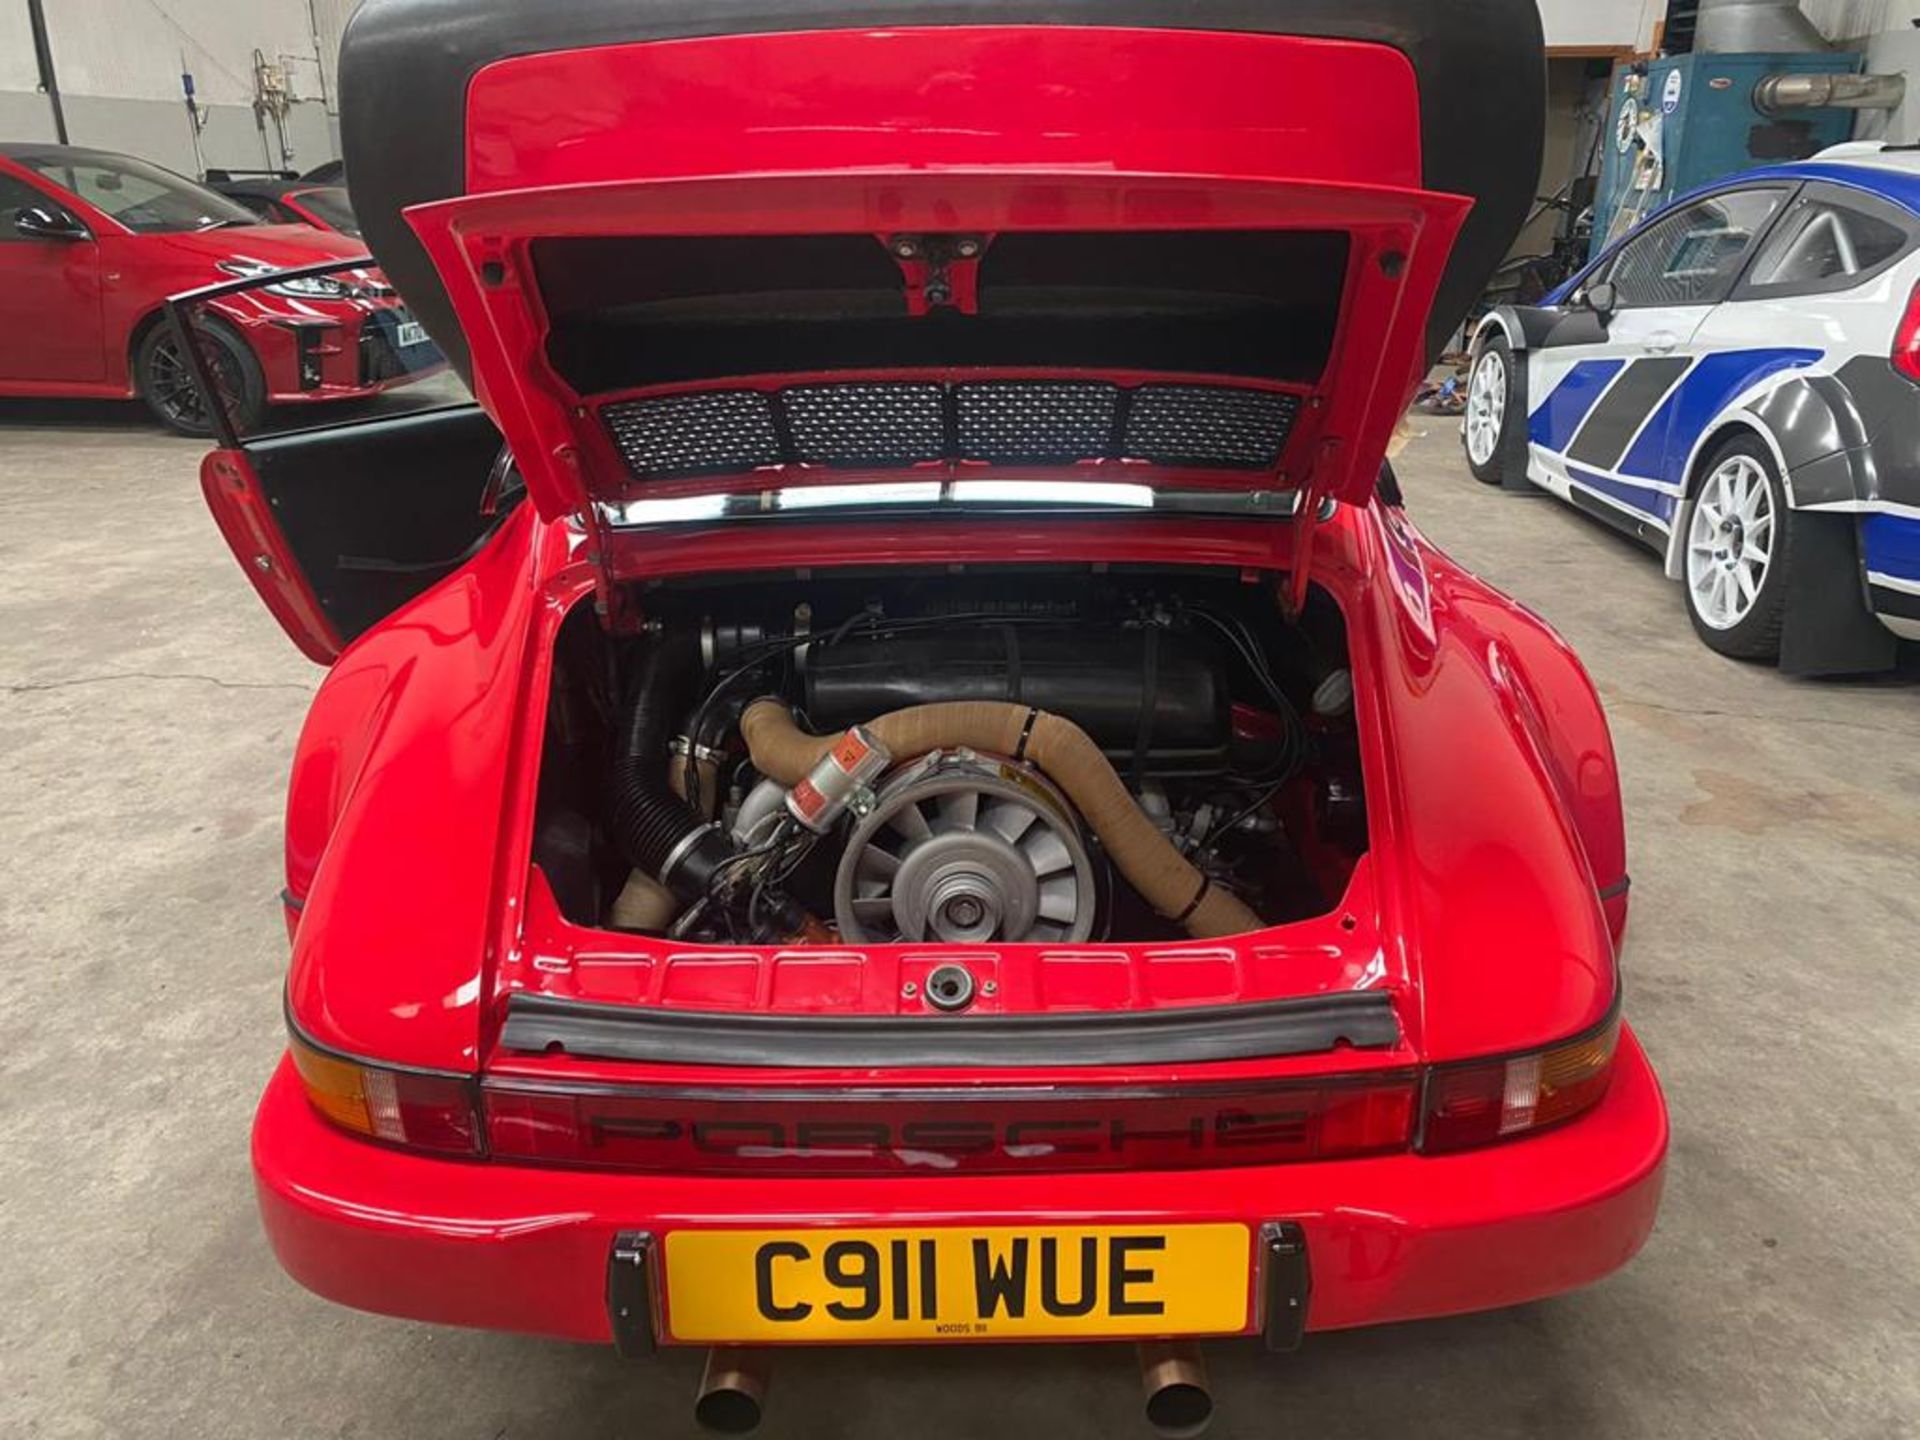 1980 PORSCHE 911 SC SPORT WHICH HAS BEEN FULLY REBUILT TO BE IDENTICAL TO A 1974 911 RSR *NO VAT* - Image 6 of 12